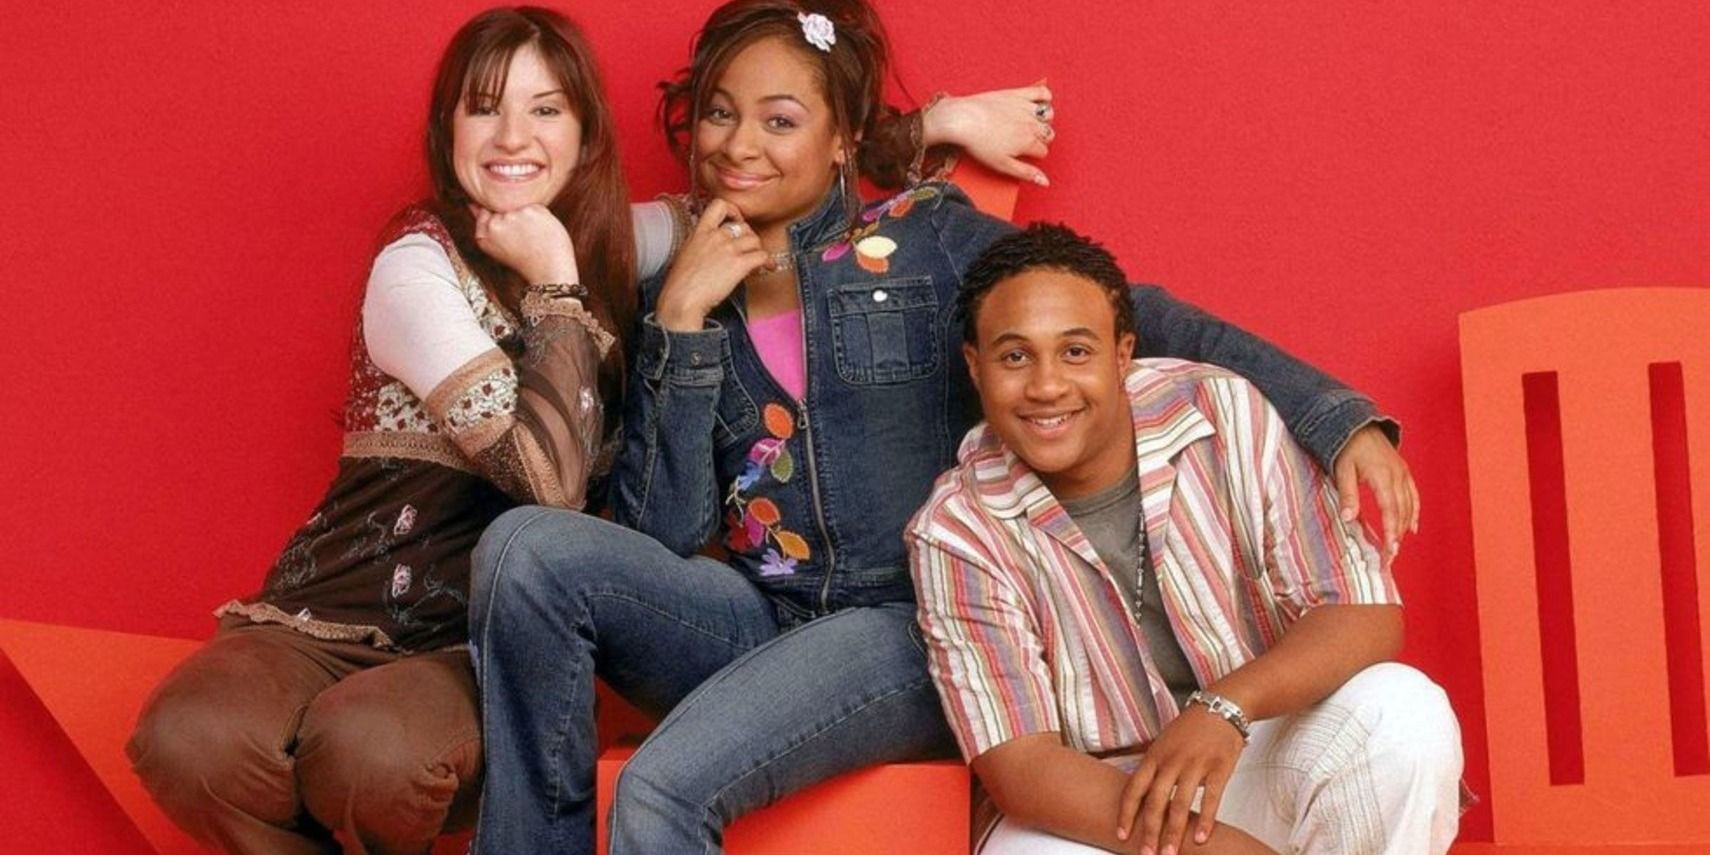 10 Best Disney Channel Theme Songs Ranked